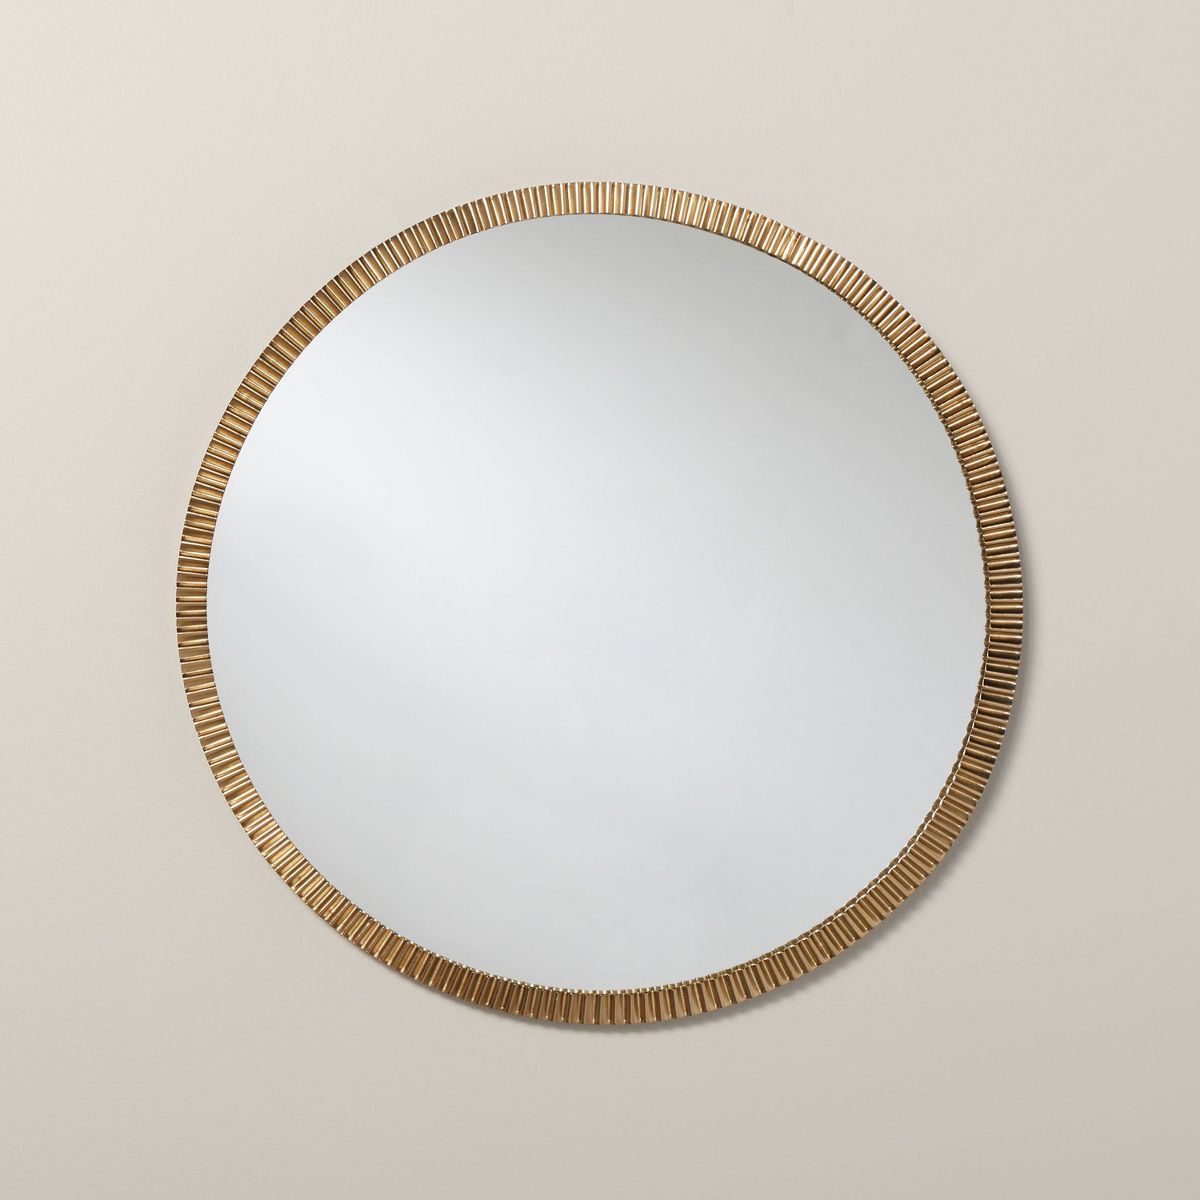 20" Pleated Brass Round Wall Mirror Antique Finish - Hearth & Hand™ with Magnolia | Target